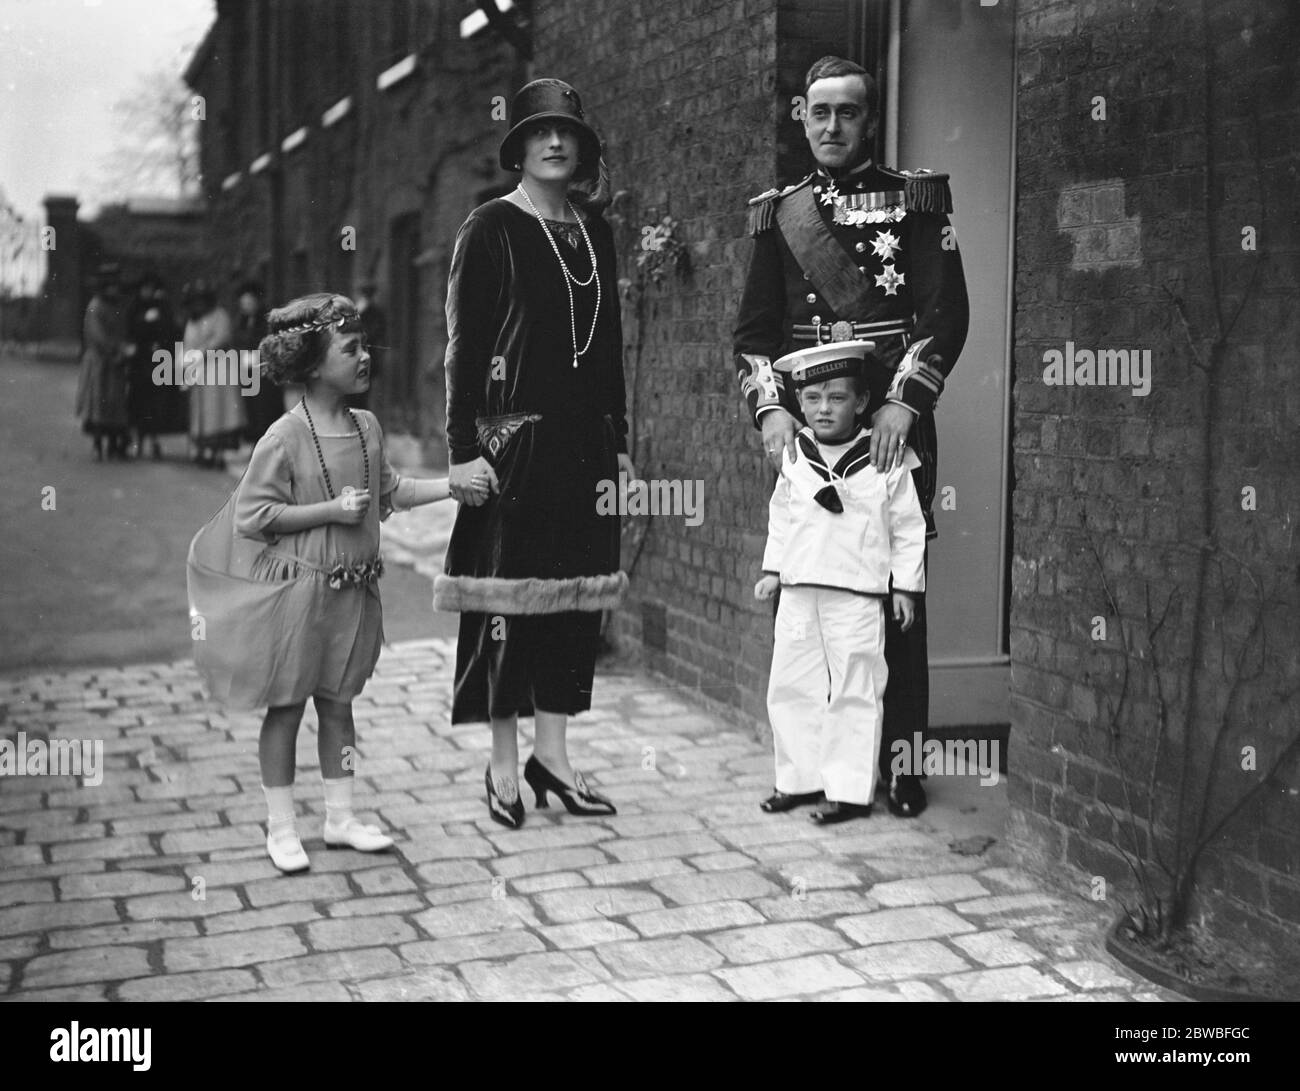 Wedding of Crown Prince of Sweden and Lady Louise Mountbatten at St James Lady Tatiana Mountbatten , Marchioness of Milford Haven , Marquis of Milford Haven and the little Earl of Medina 4 November 1923 Stock Photo